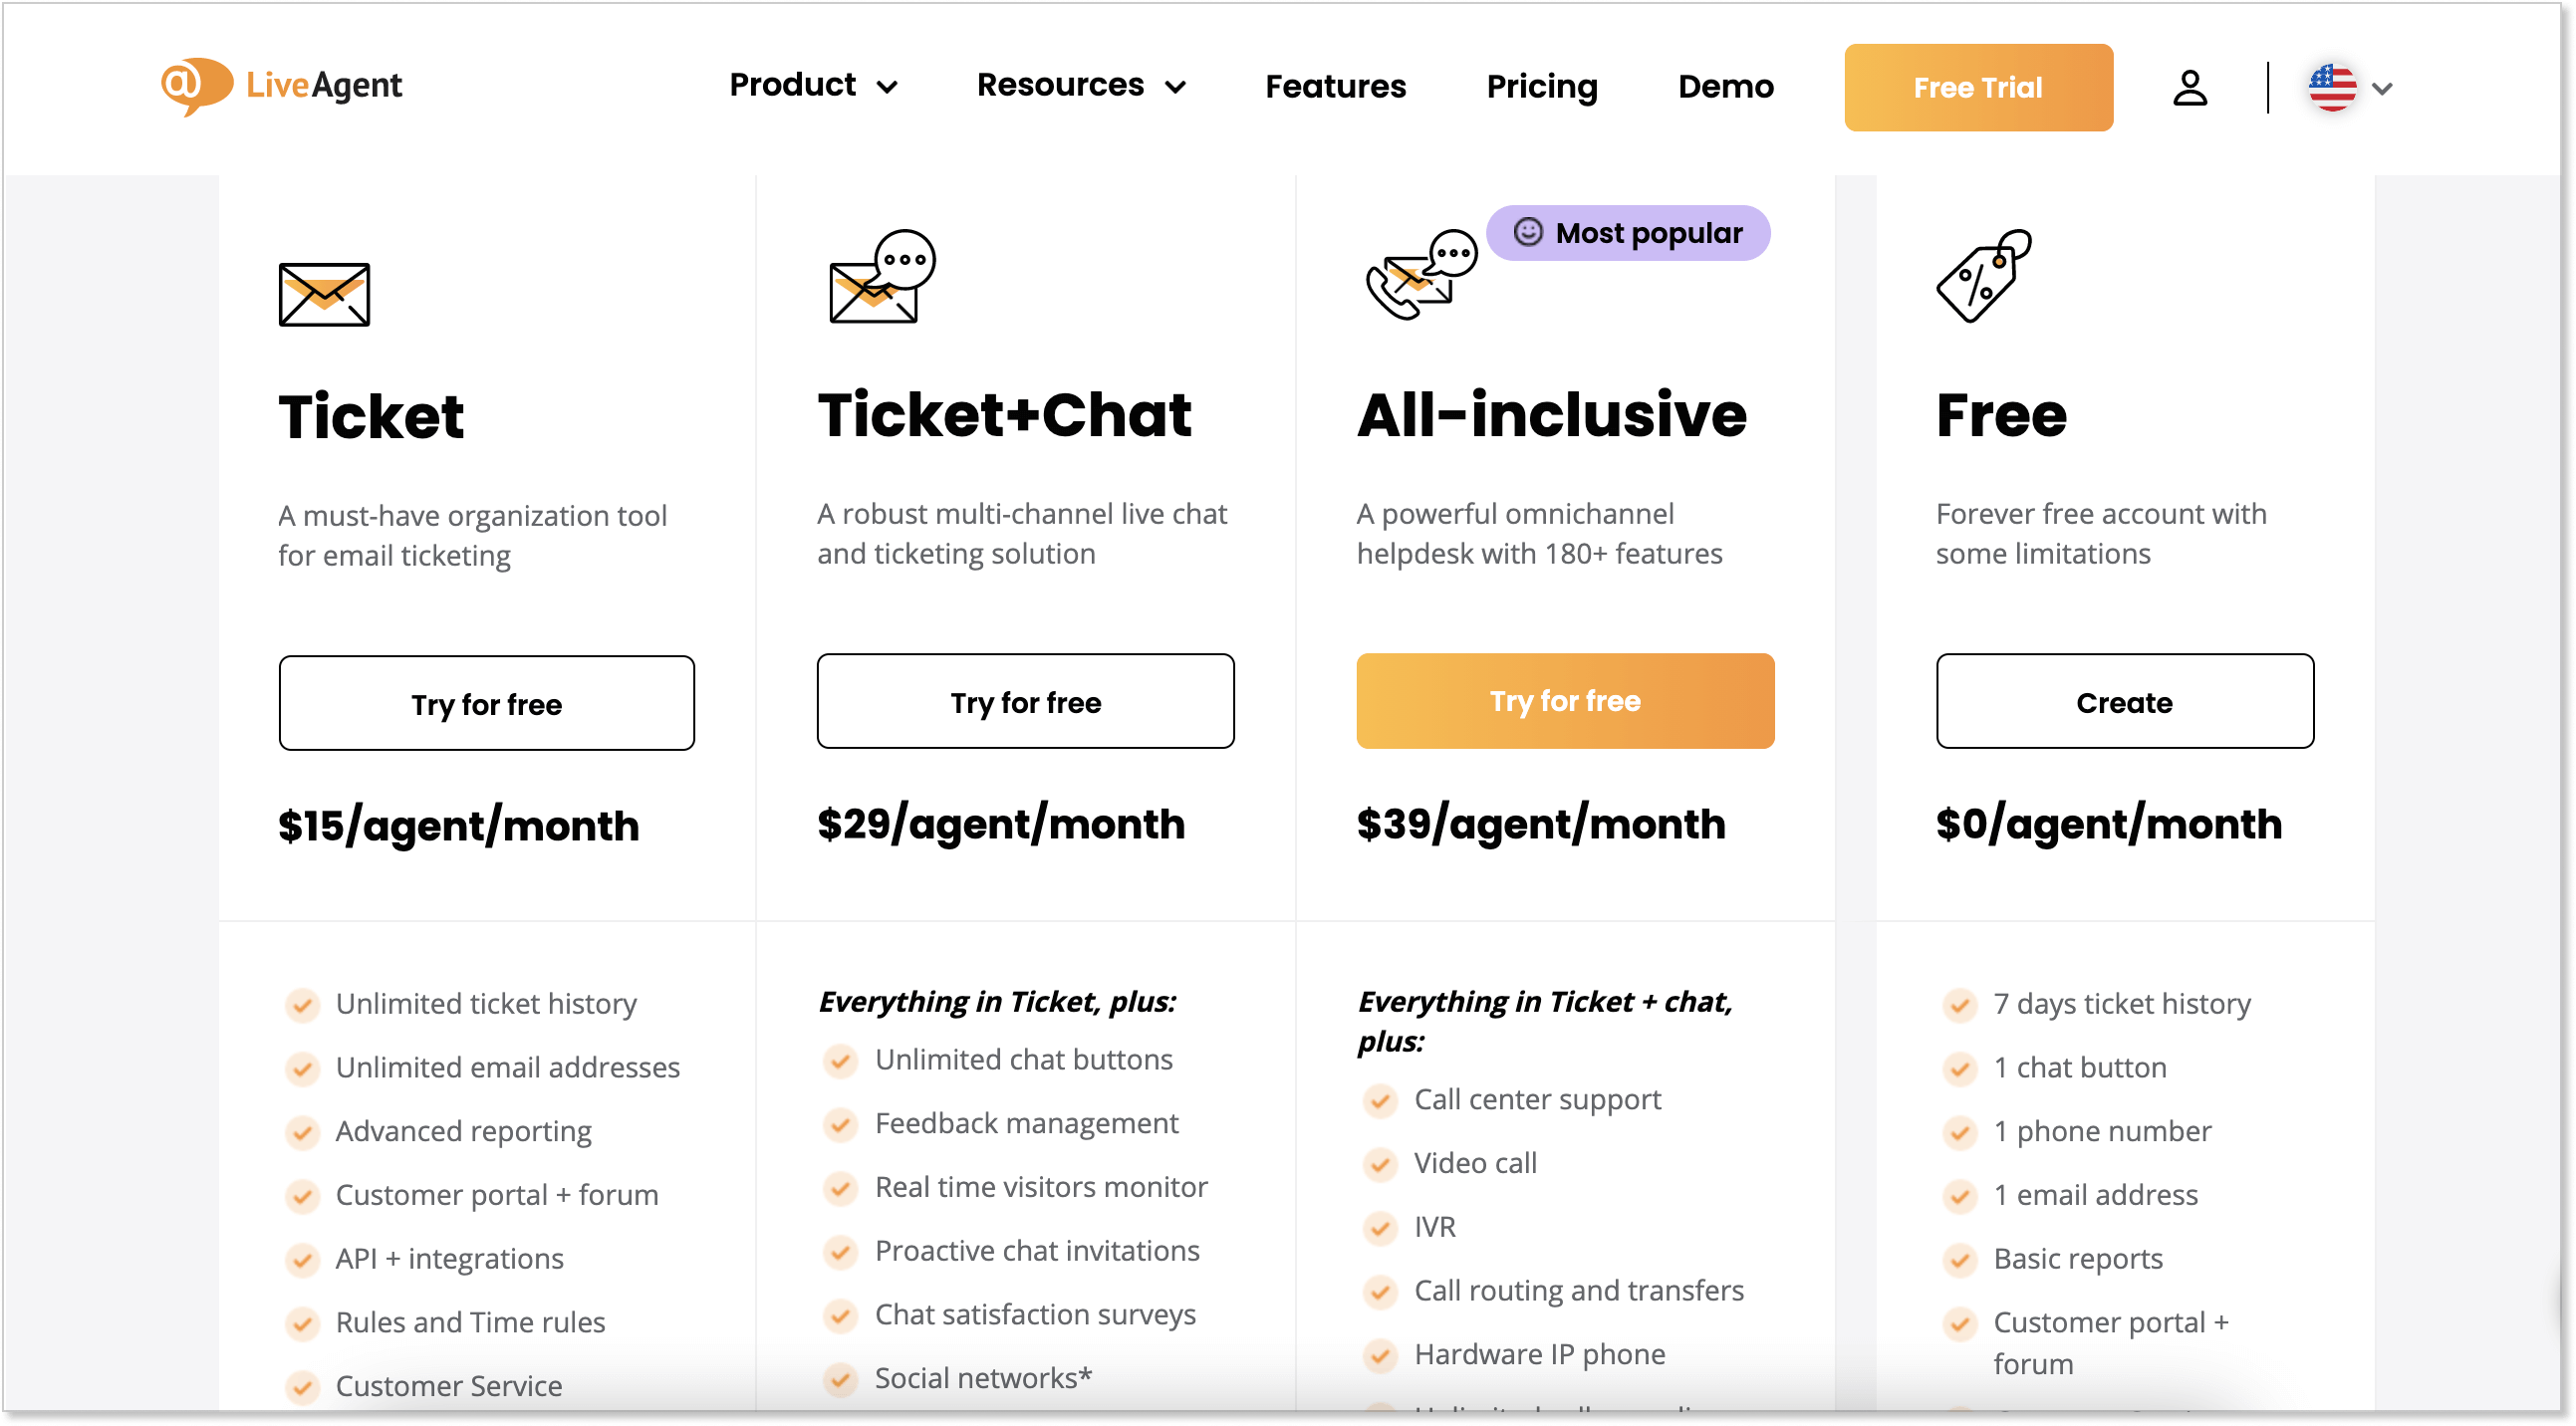 LiveAgent subscription plans with prices